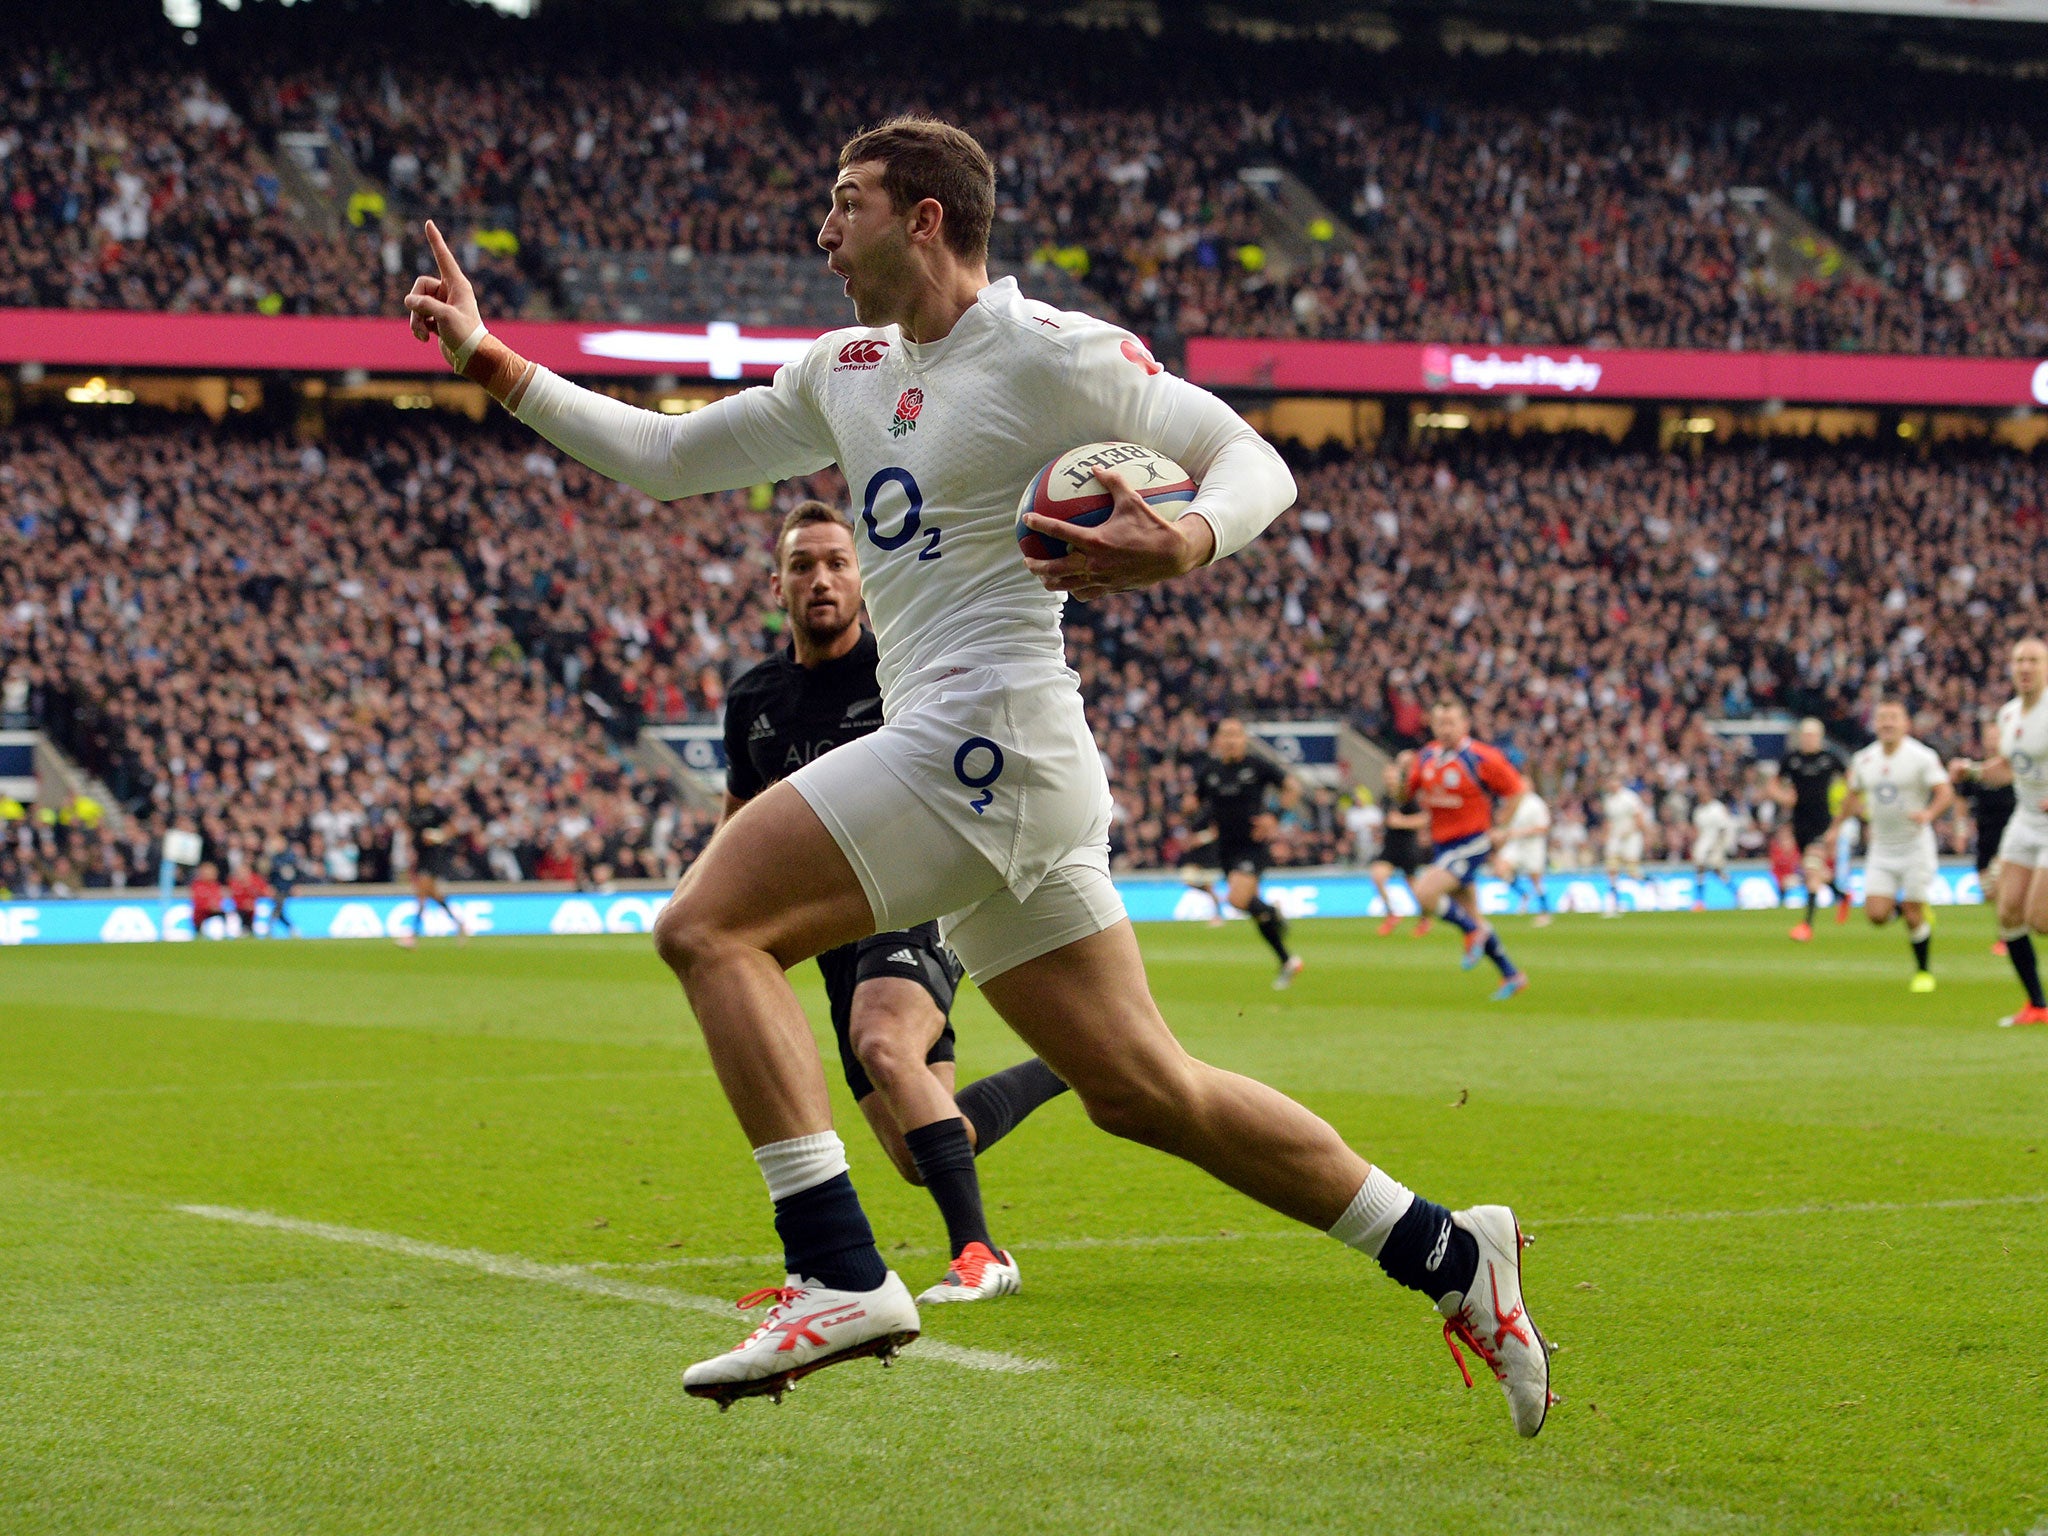 Jonny May runs in for his first international try